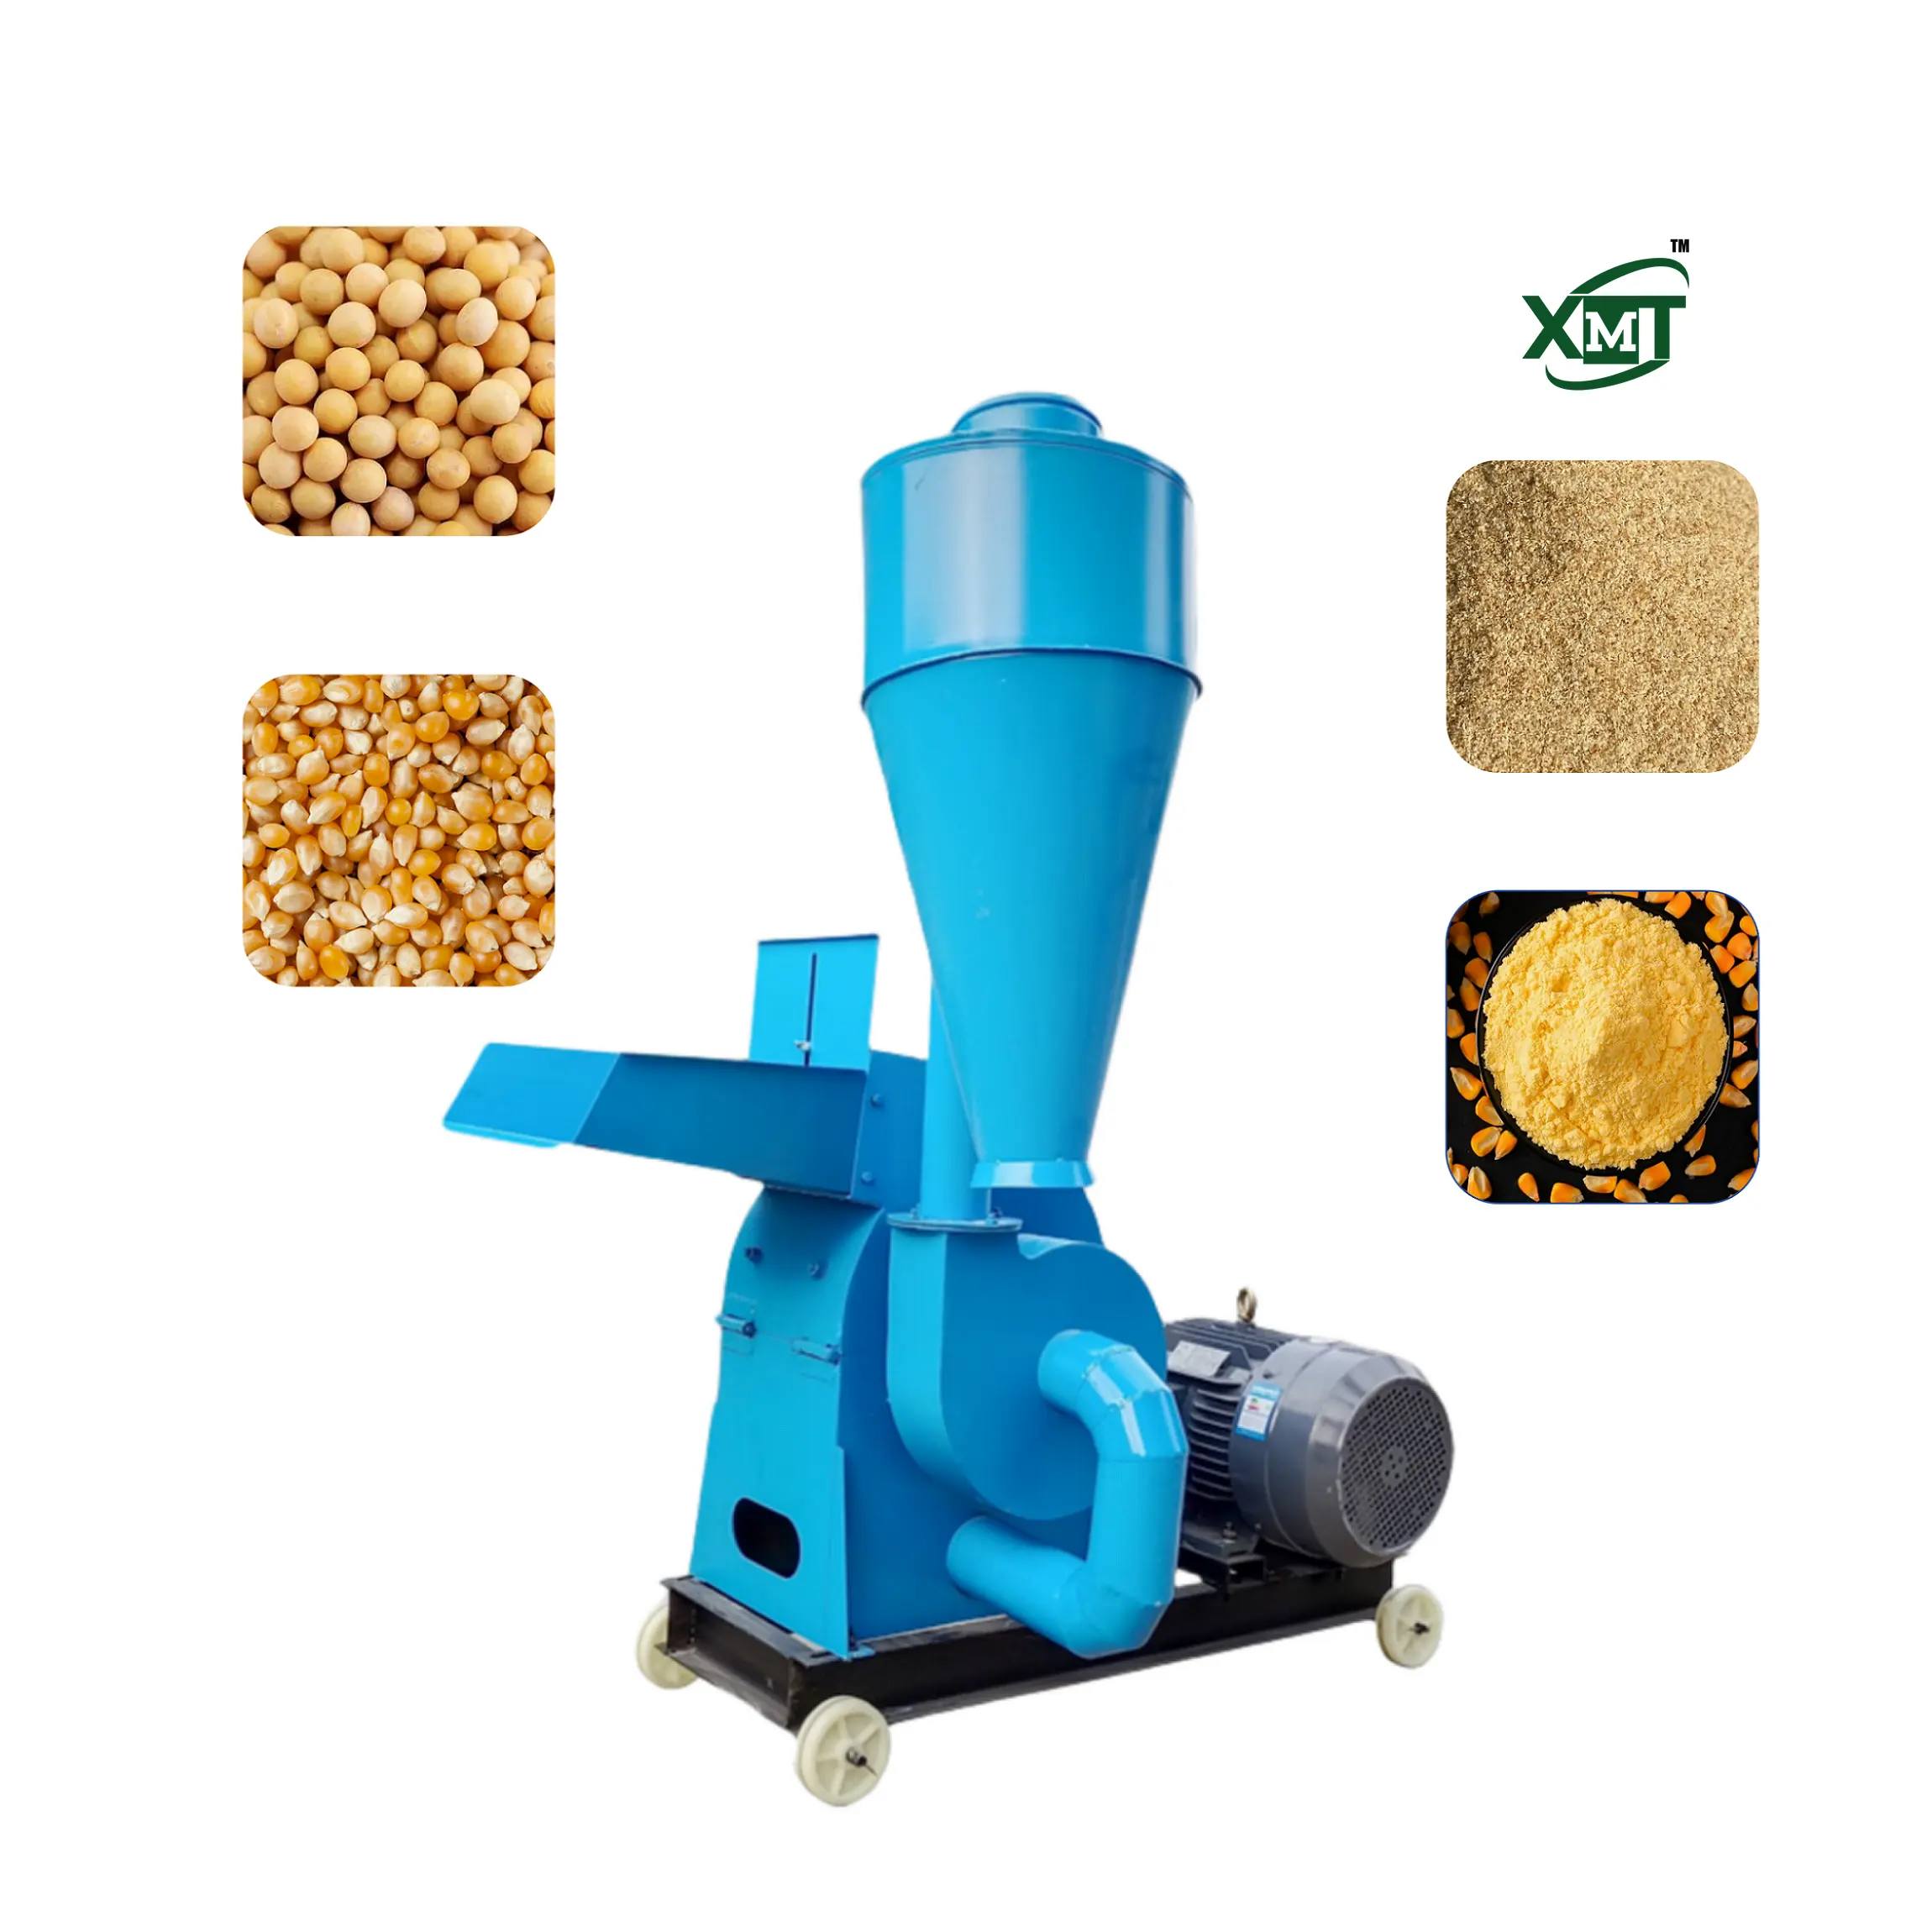 Grain grinding hammer mill maize Hammer mill feed crusher machine for home small hammer mill